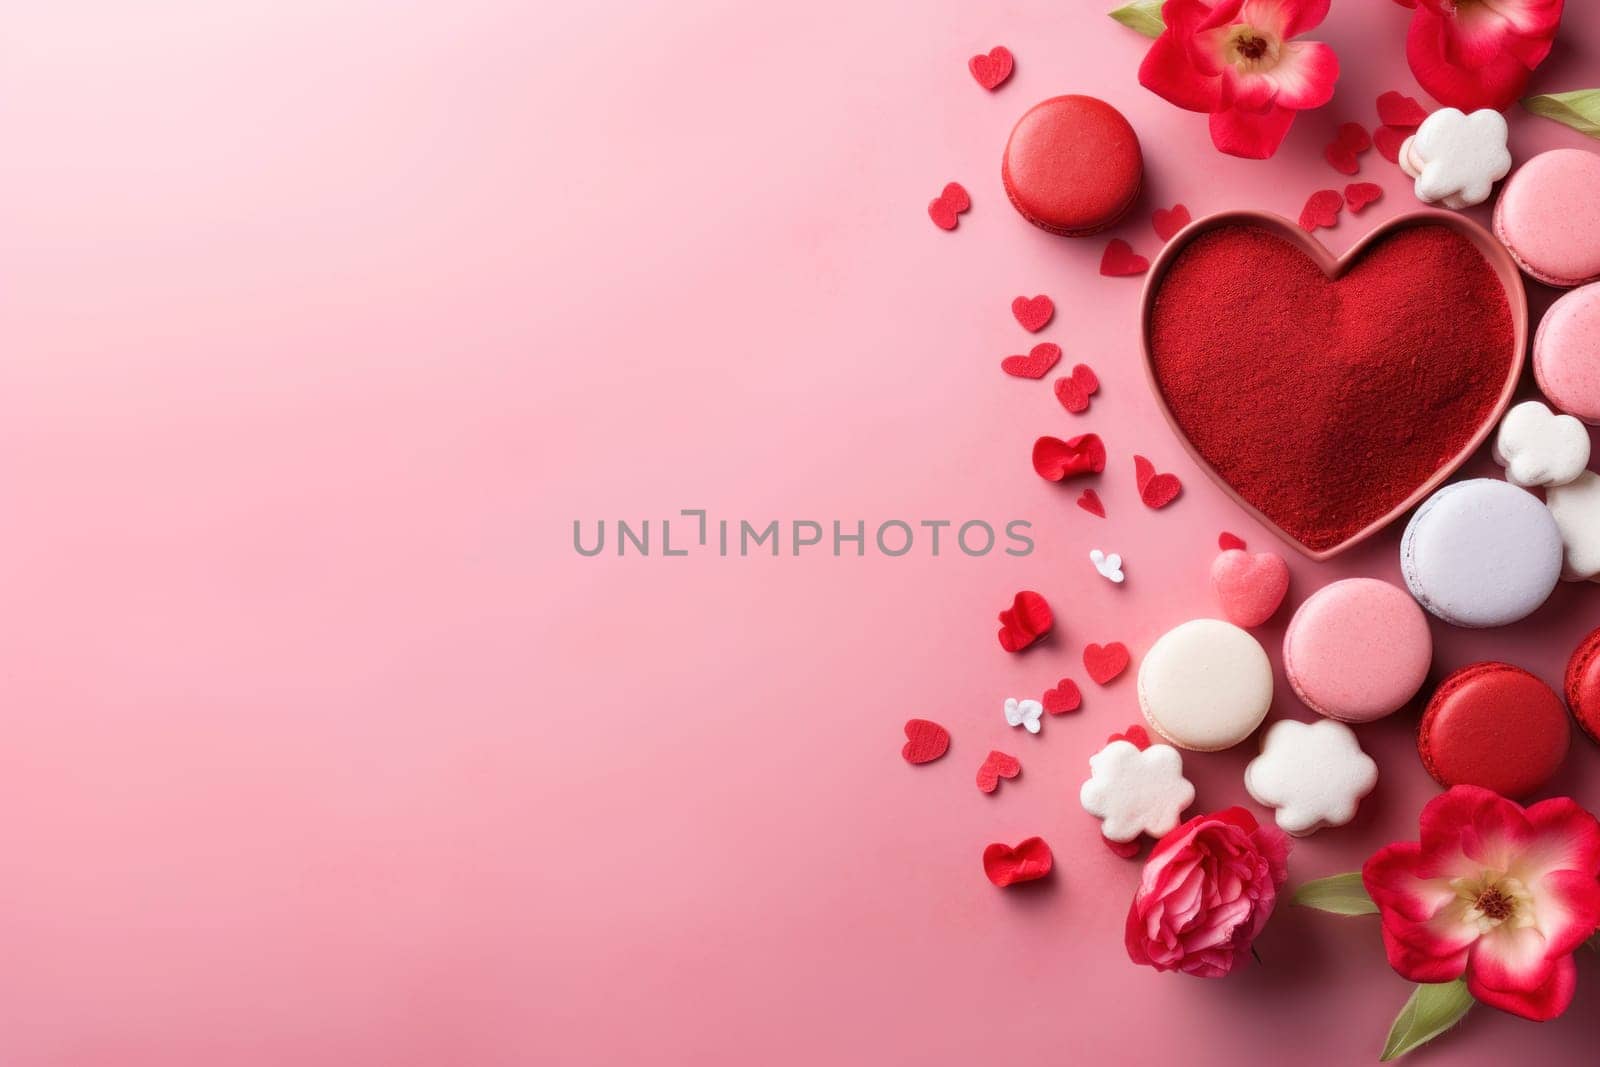 A festive background filled with cookies, hearts and flowers by andreyz